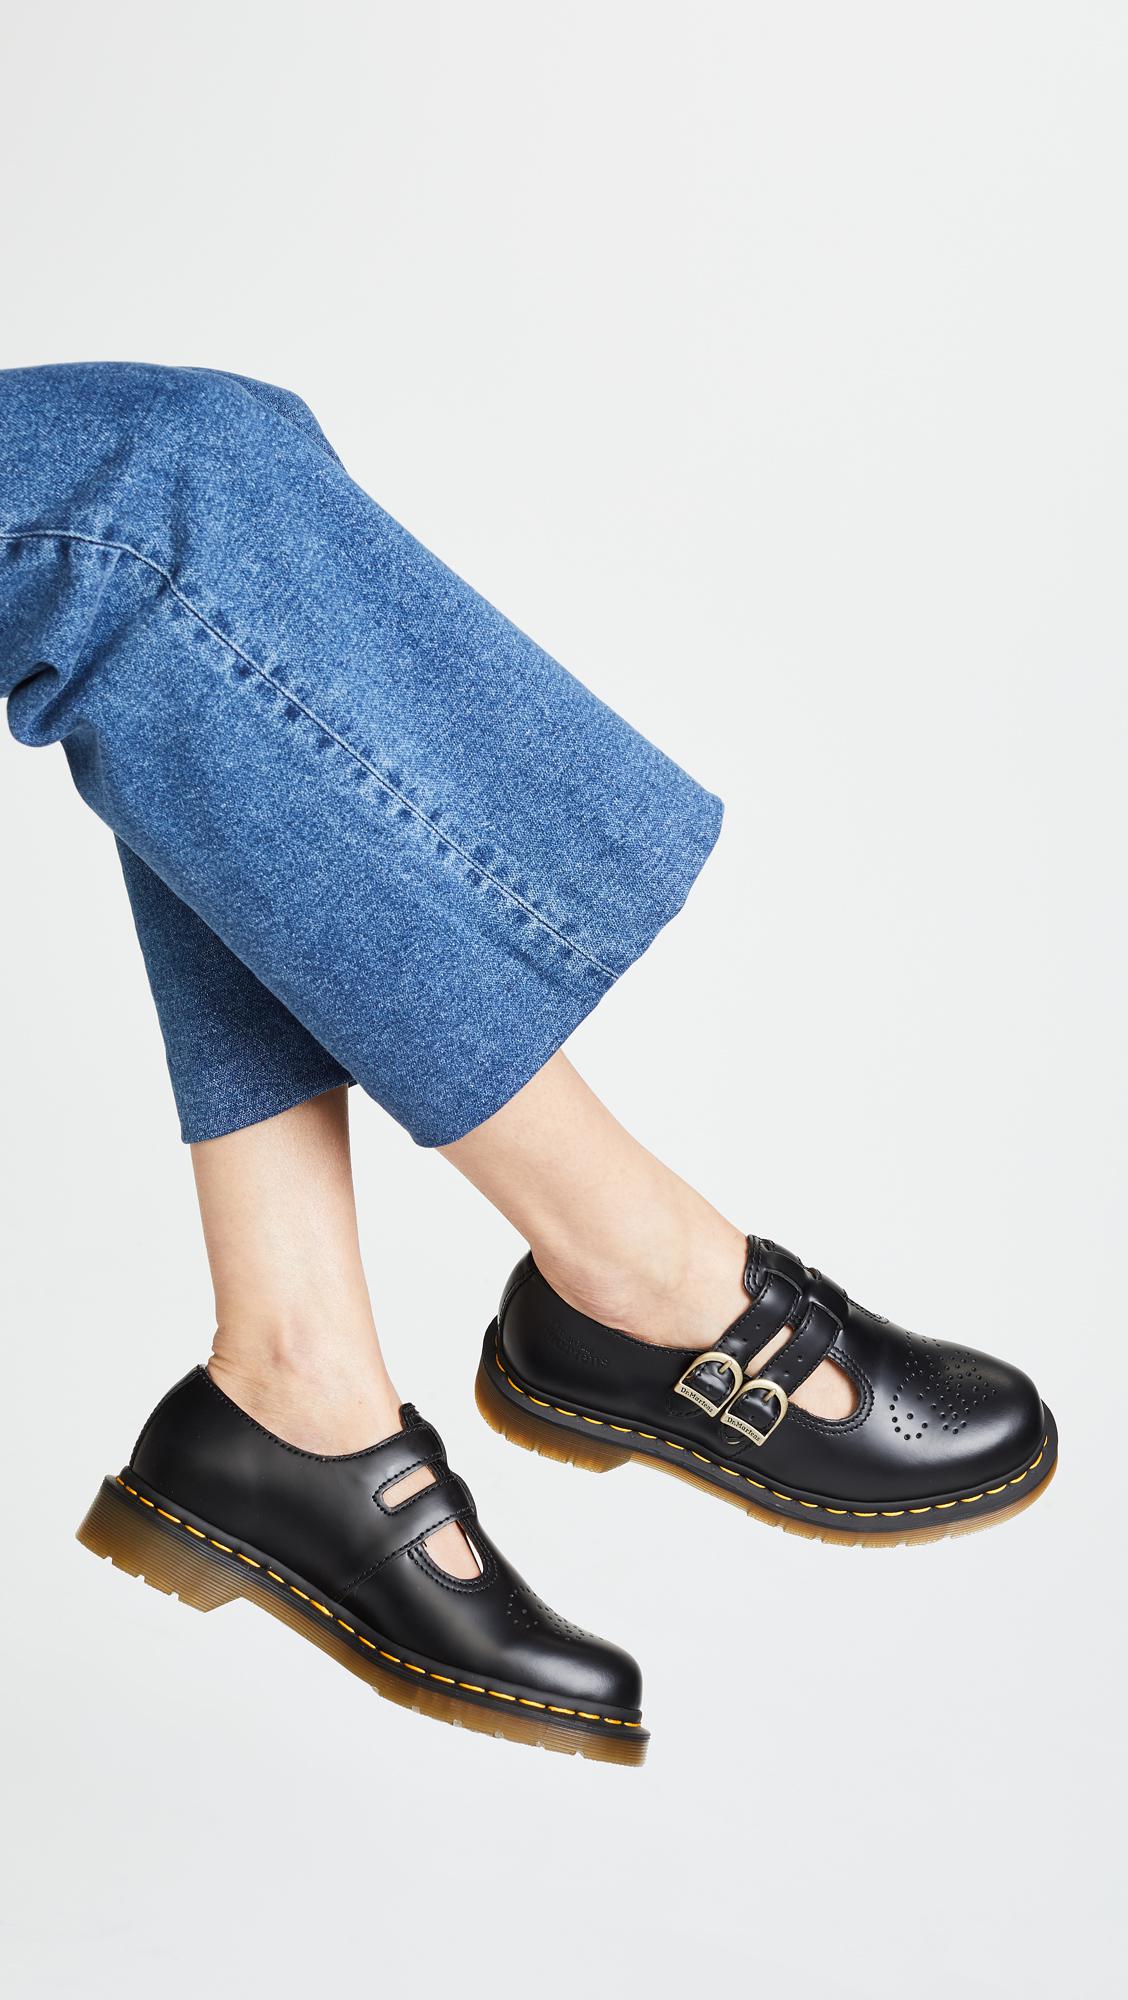 Dr. Martens Leather Core 8065 Mary Jane Shoe in Black - Save 71 